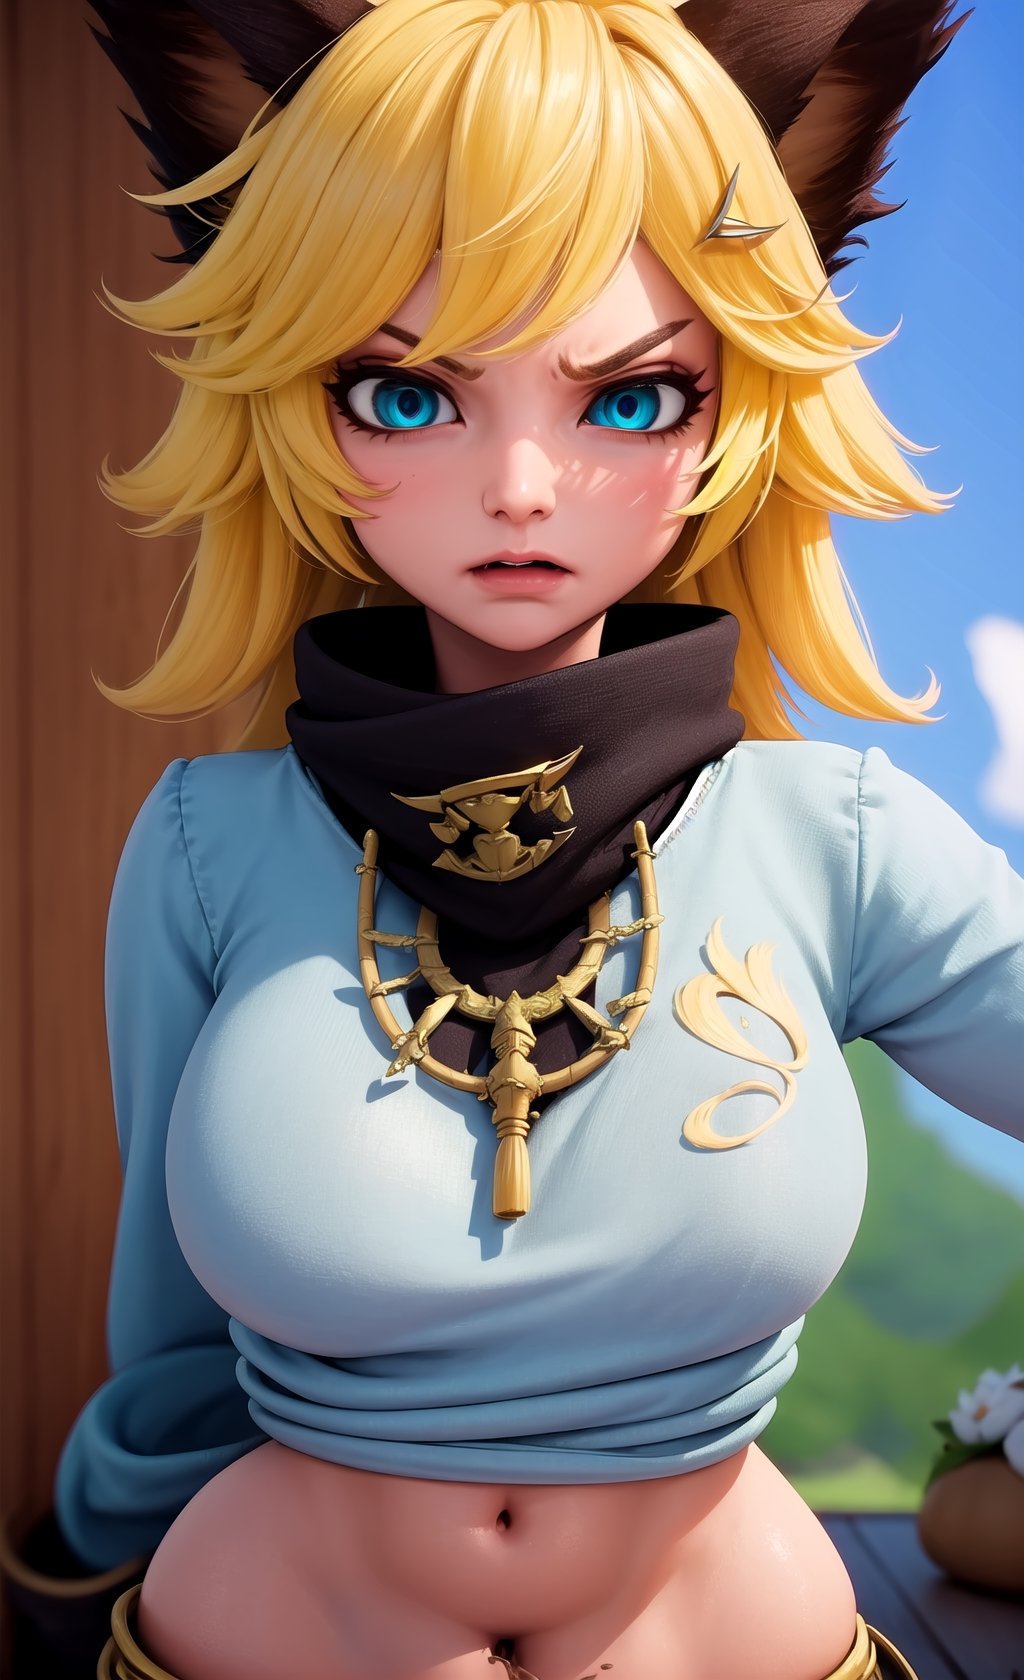 (masterpiece, top quality), intricate details, ((slim)), beautiful girl,1 woman, (assassin), Angry, Yellow hair, white skin, light blue eyes, cat ears, very detailed, messy hair , detailed pictures,